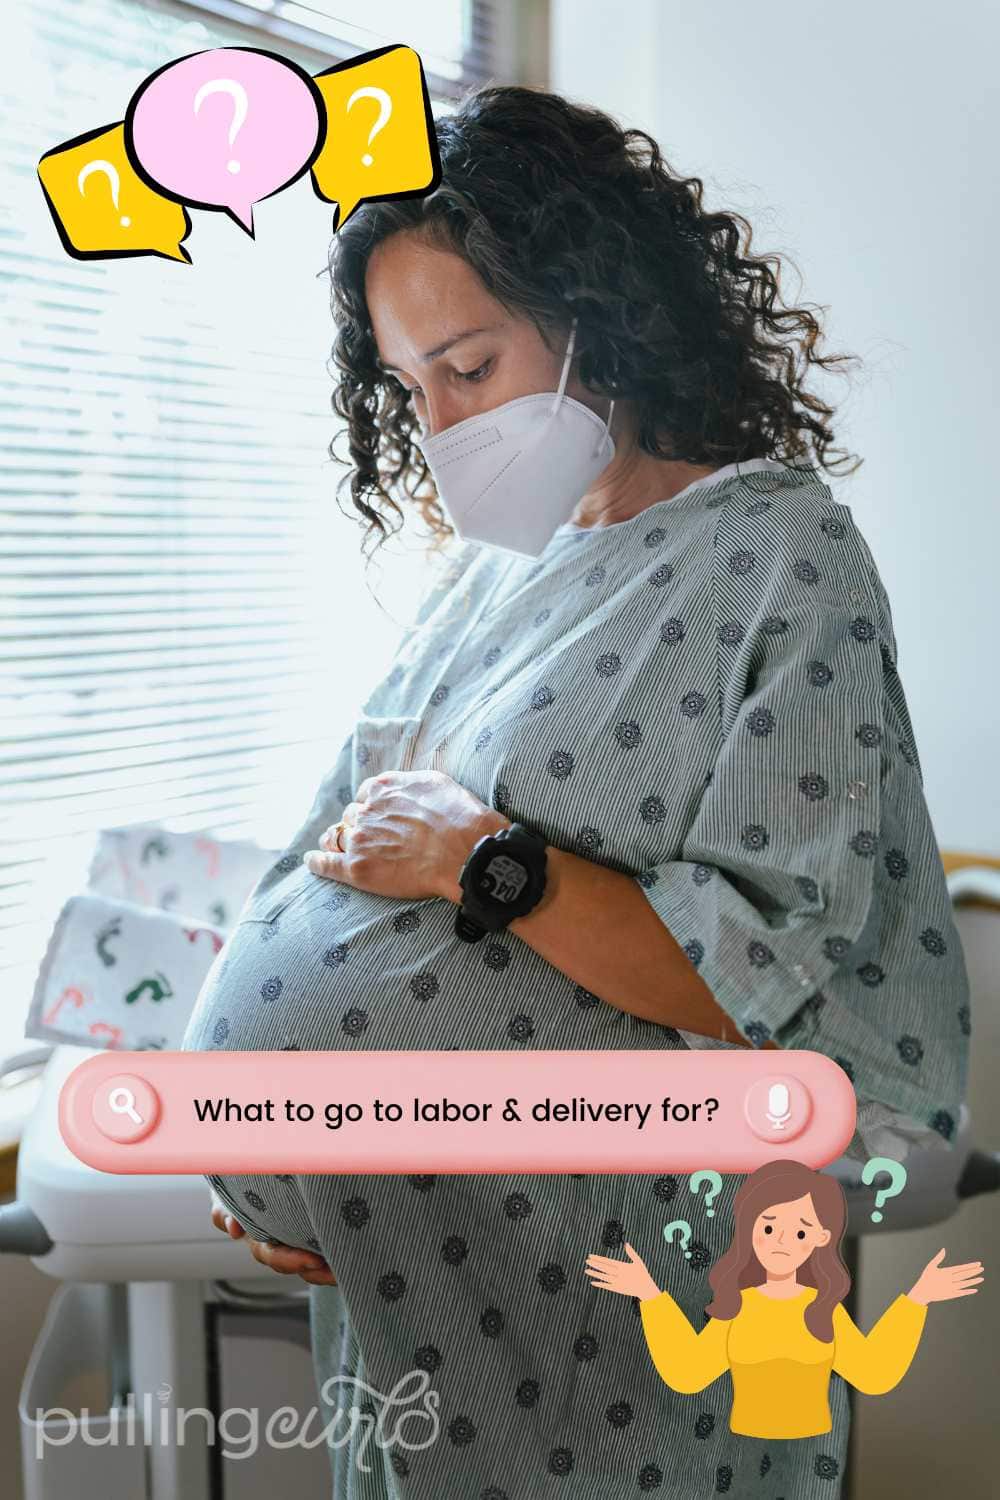 10 First Trimester Tips From a Labor and Delivery Nurse!